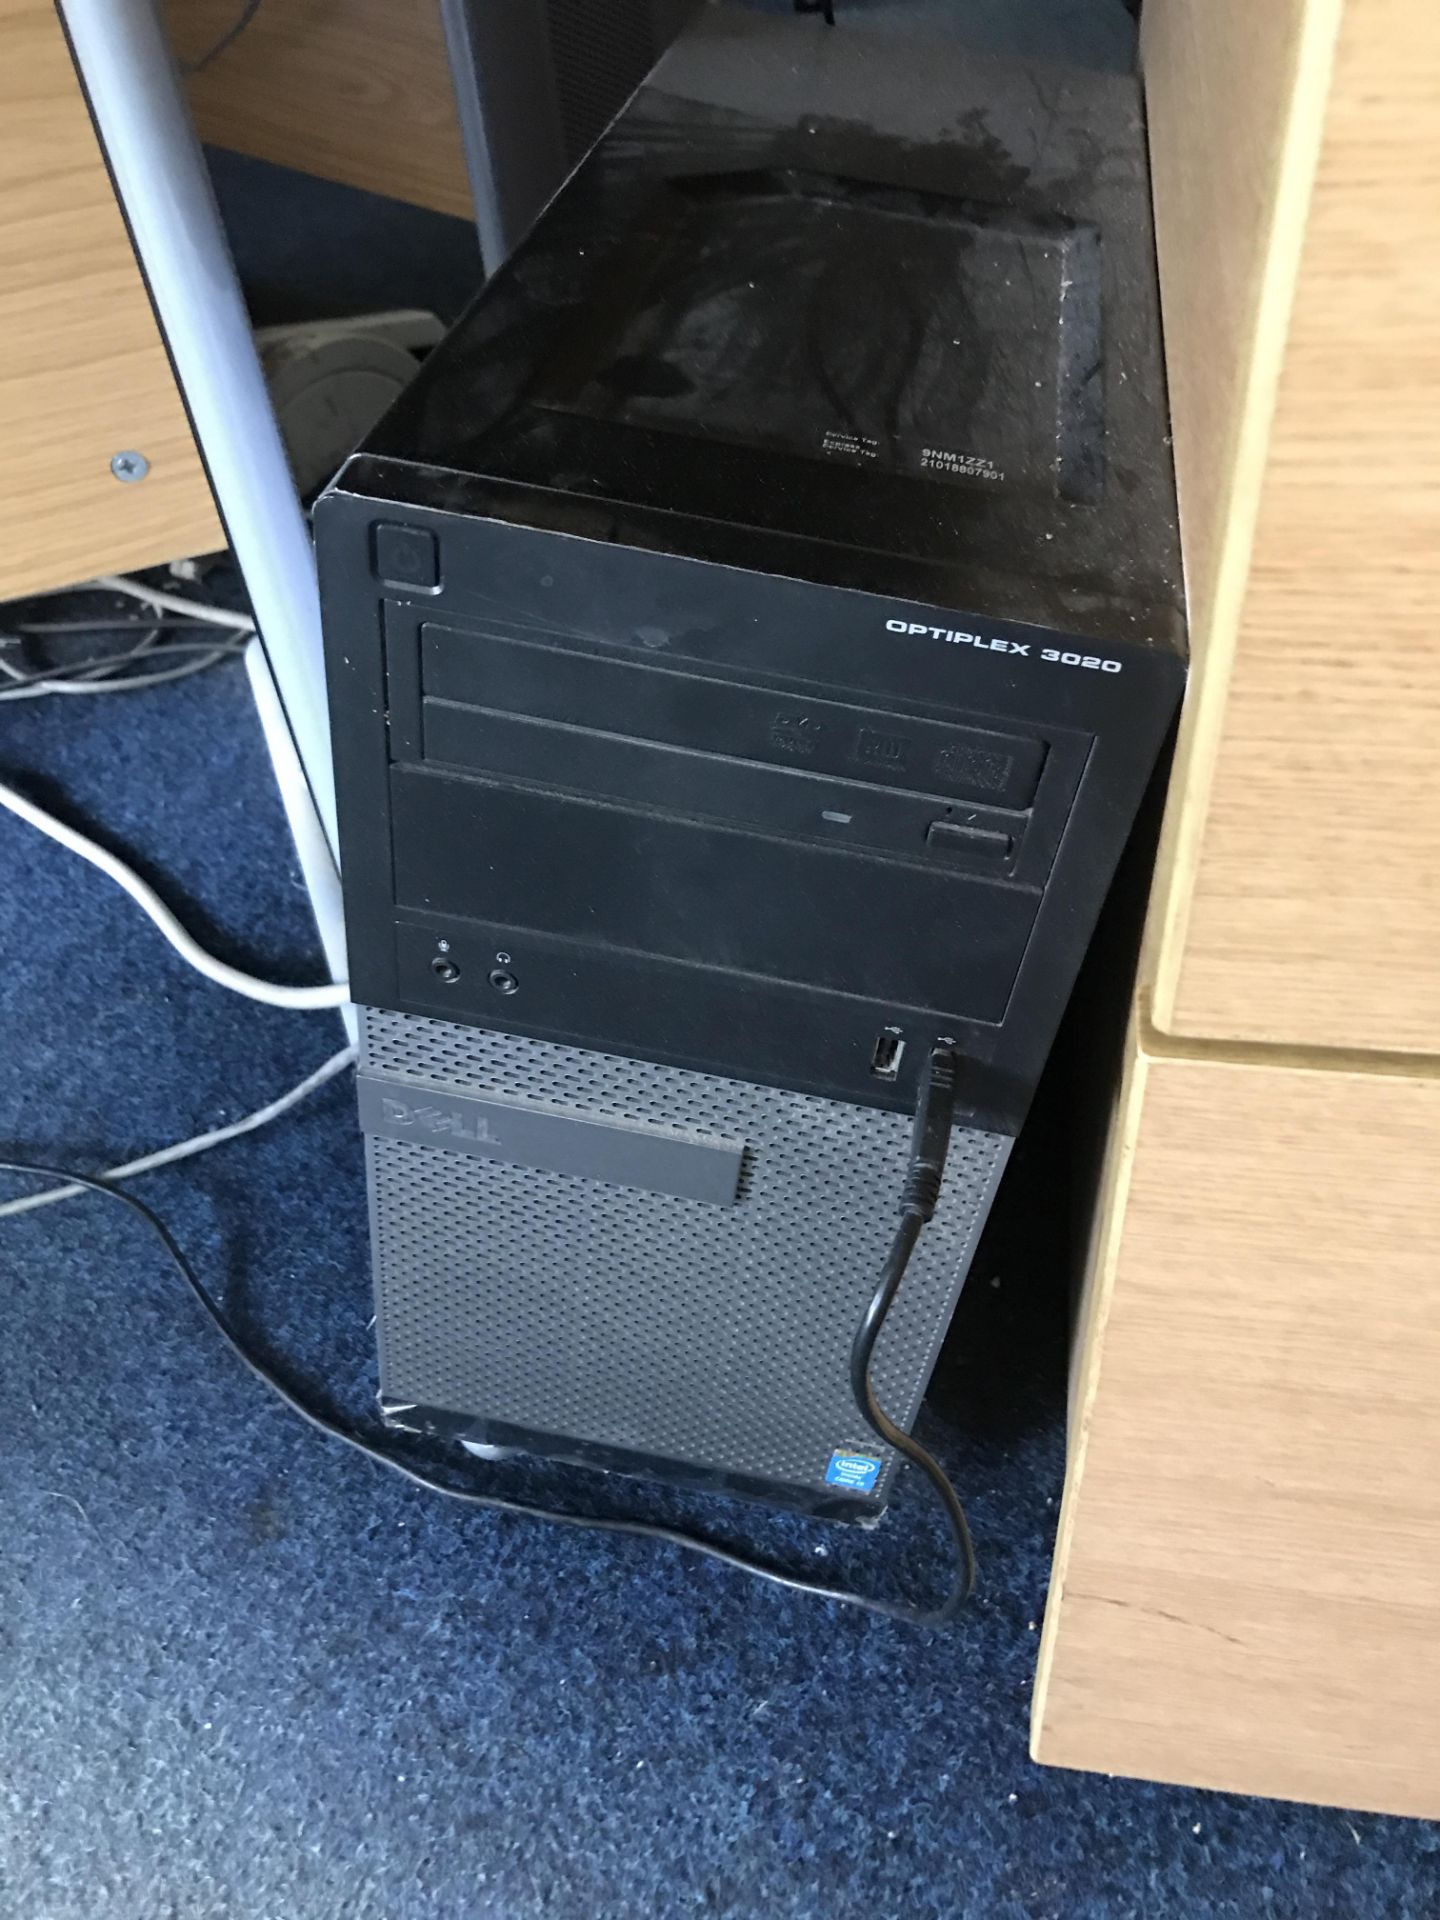 Dell Optiplex 3020 Intel Core i3 Personal Computer (hard disk removed), with two flat screen - Image 2 of 3